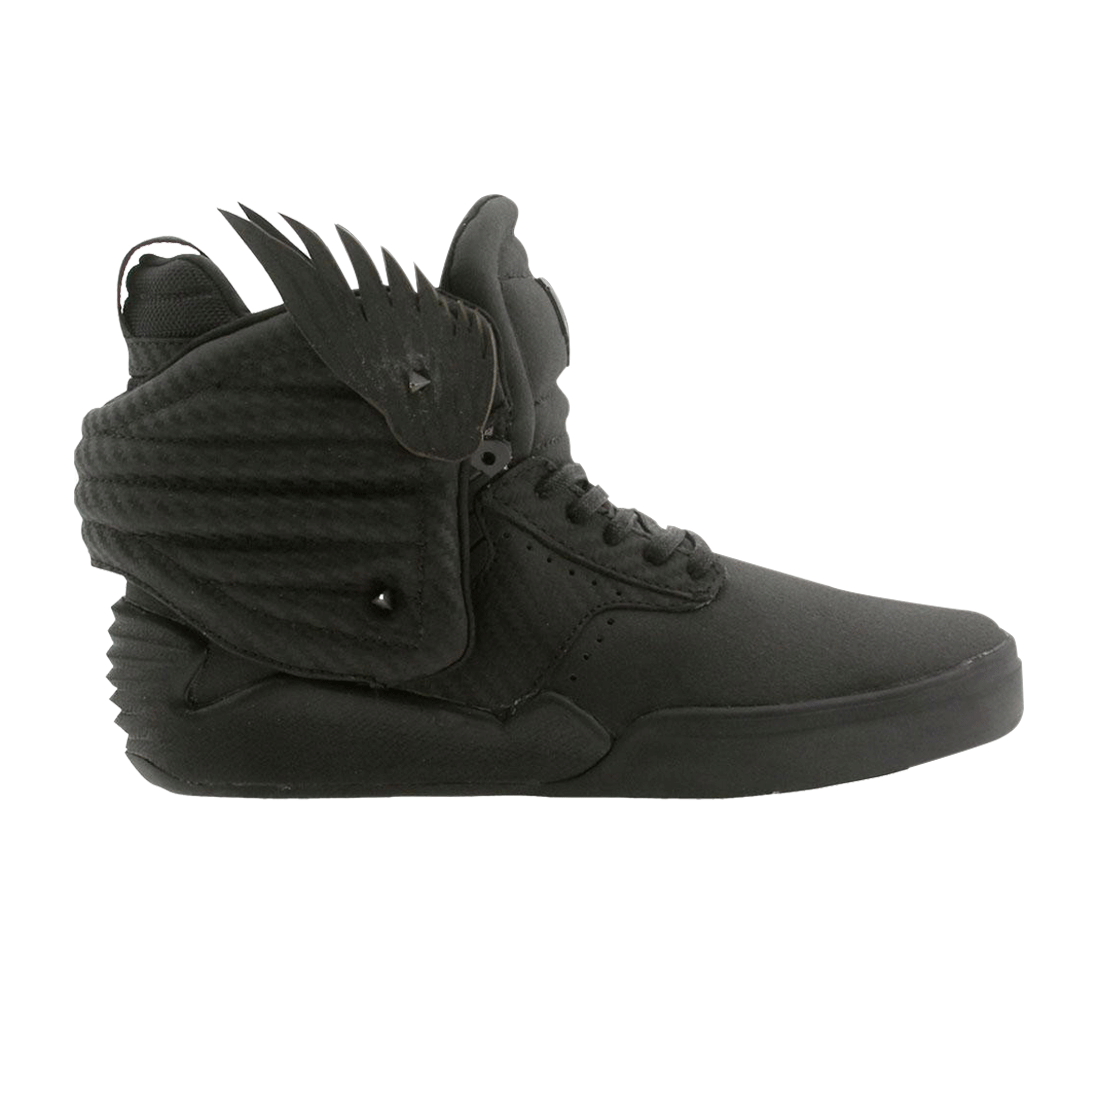 The Hunger Games x Supra Skytop 4 IV District 13 Mockingjay Pack